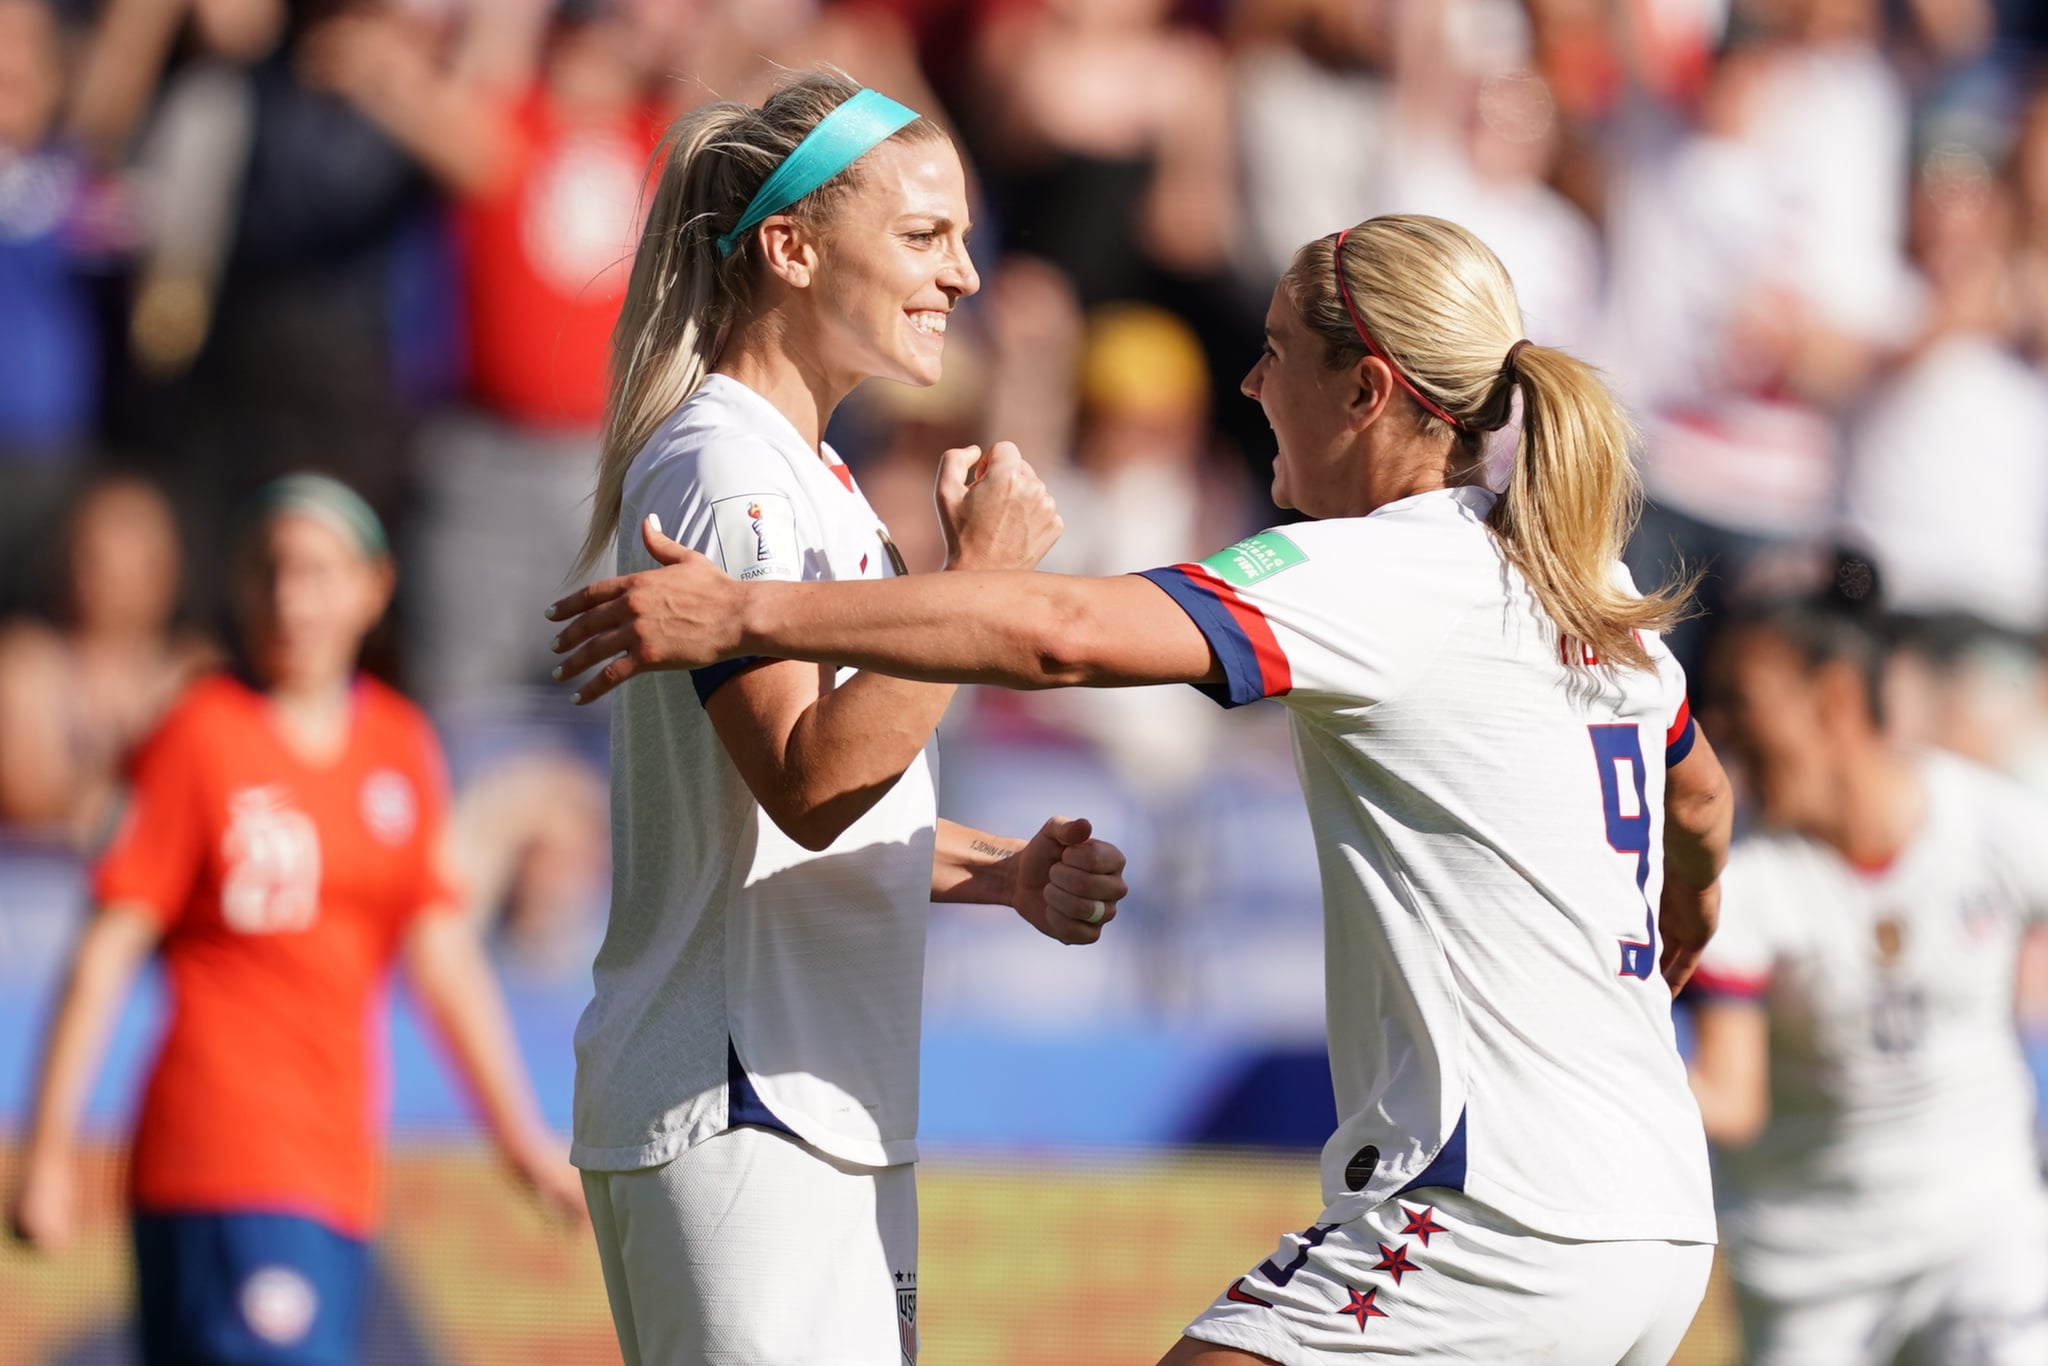 PARIS, FRANCE - JUNE 16: Players of the USA celebrate Julie Ertz's goal during the 2019 FIFA Women's World Cup France group F match between USA and Chile at Parc des Princes on June 16, 2019 in Paris, France. (Photo by Daniela Porcelli/Getty Images)